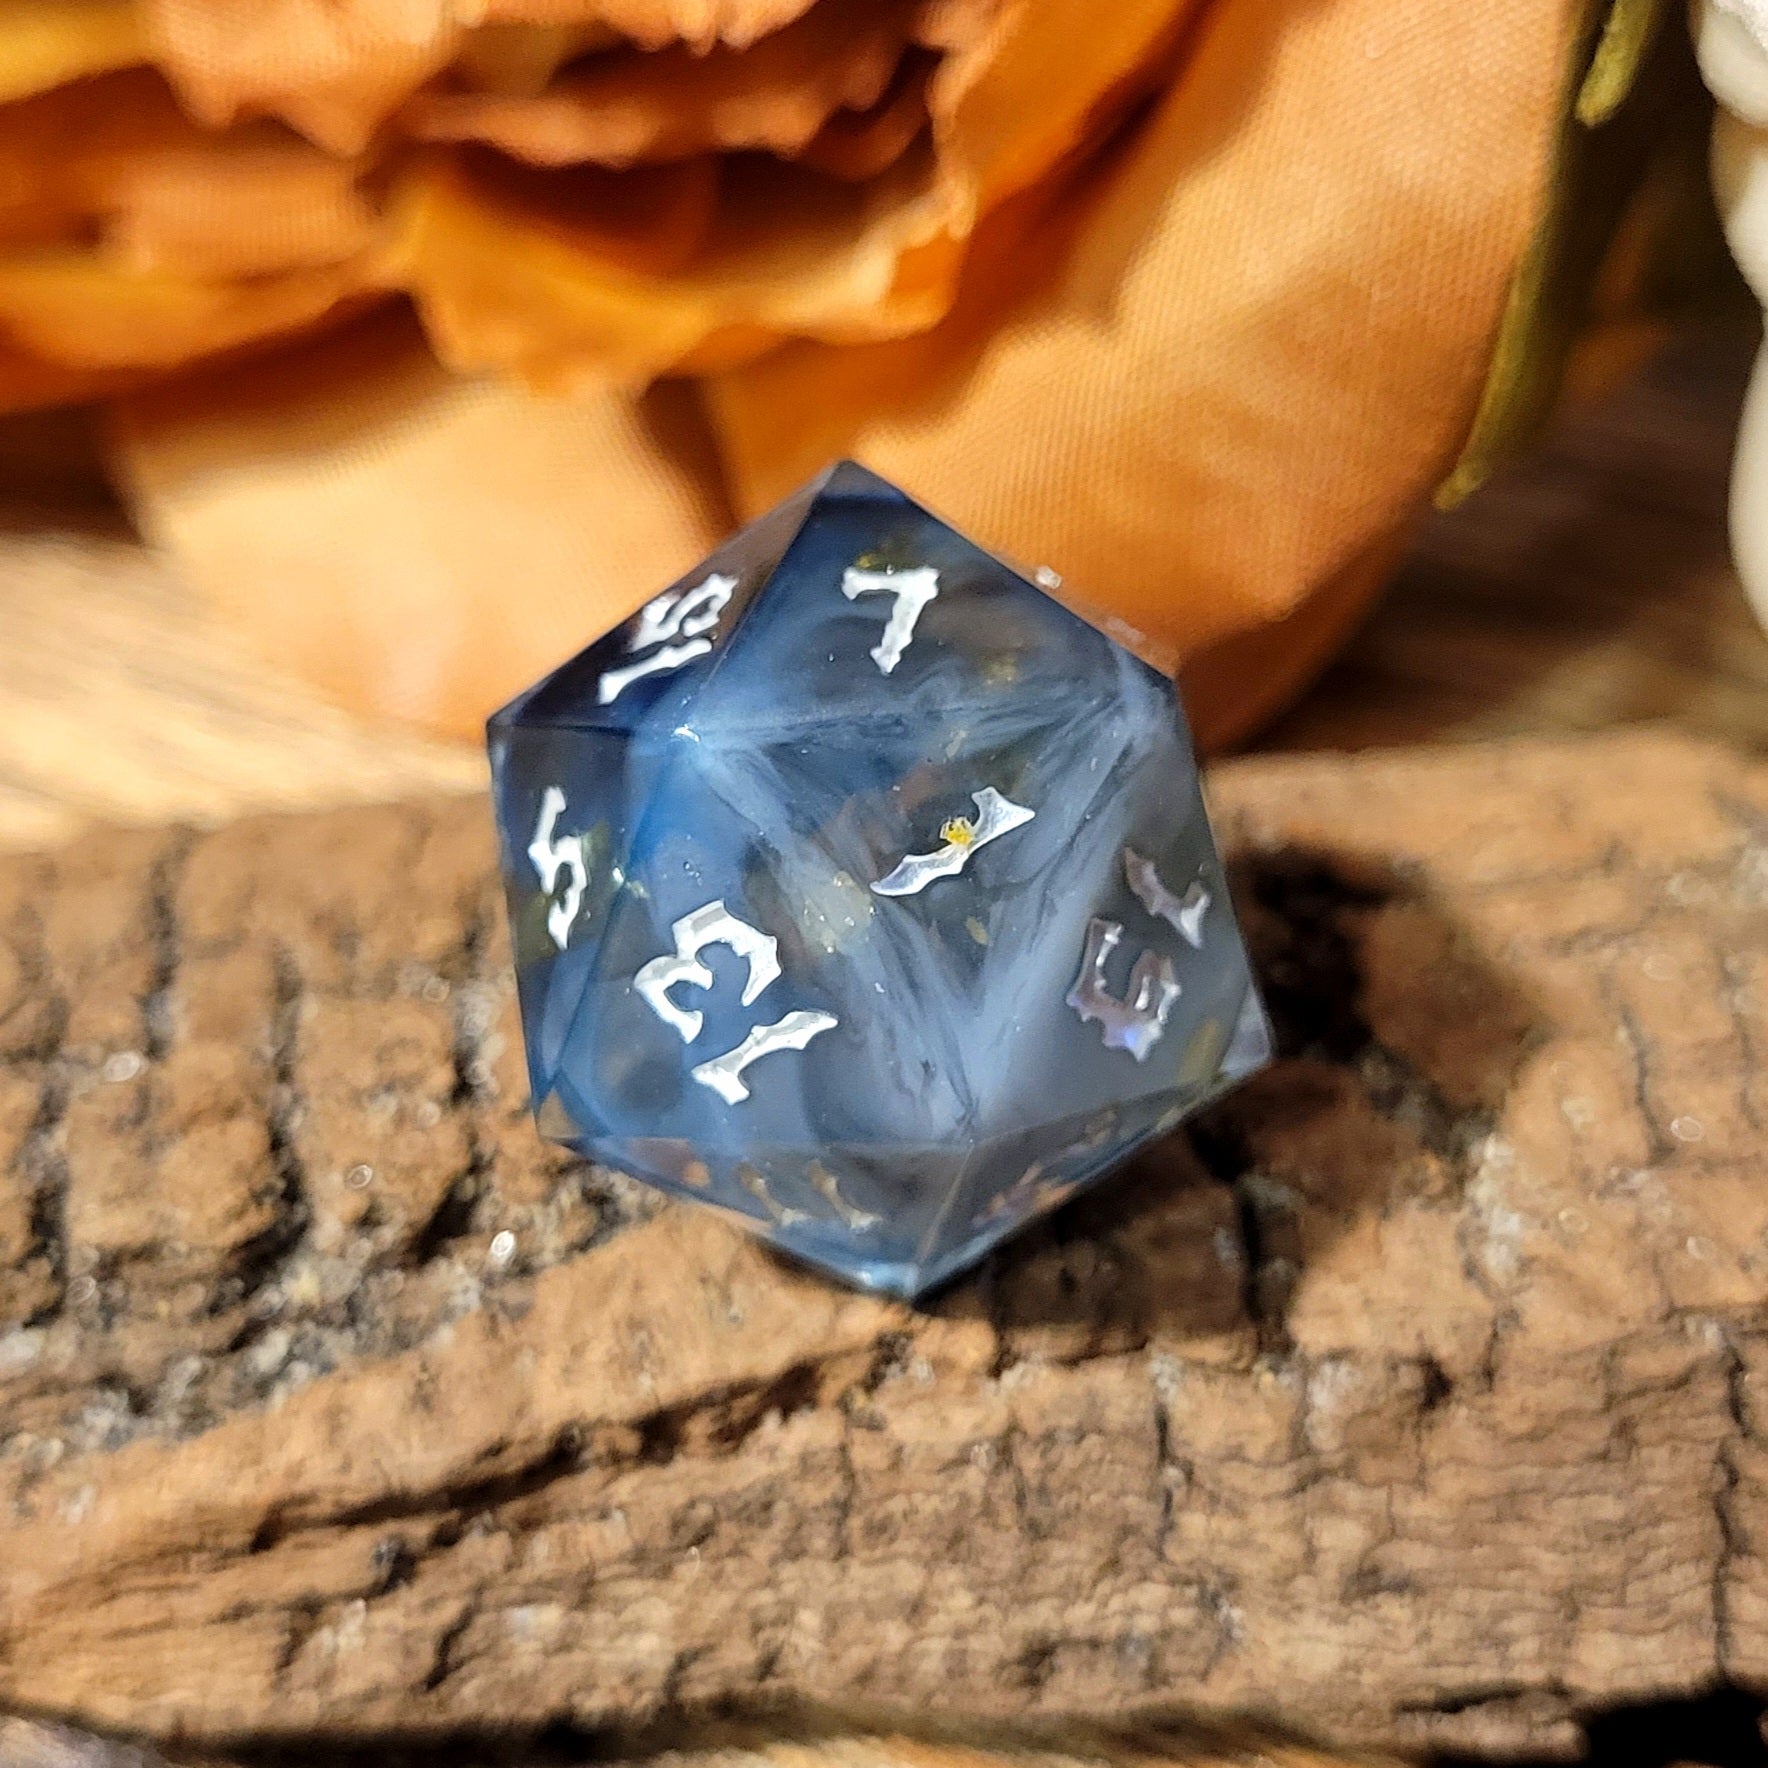 A twenty-sided die that has a clear base with black, white, and Oxford blue drips. The font is Sugar Bee RPG's signature death metal font, and is inked in white. The most prominent numbers are 5, 15, 7, 13, 1 and 19. This angle has a light blue milky swirl to it.